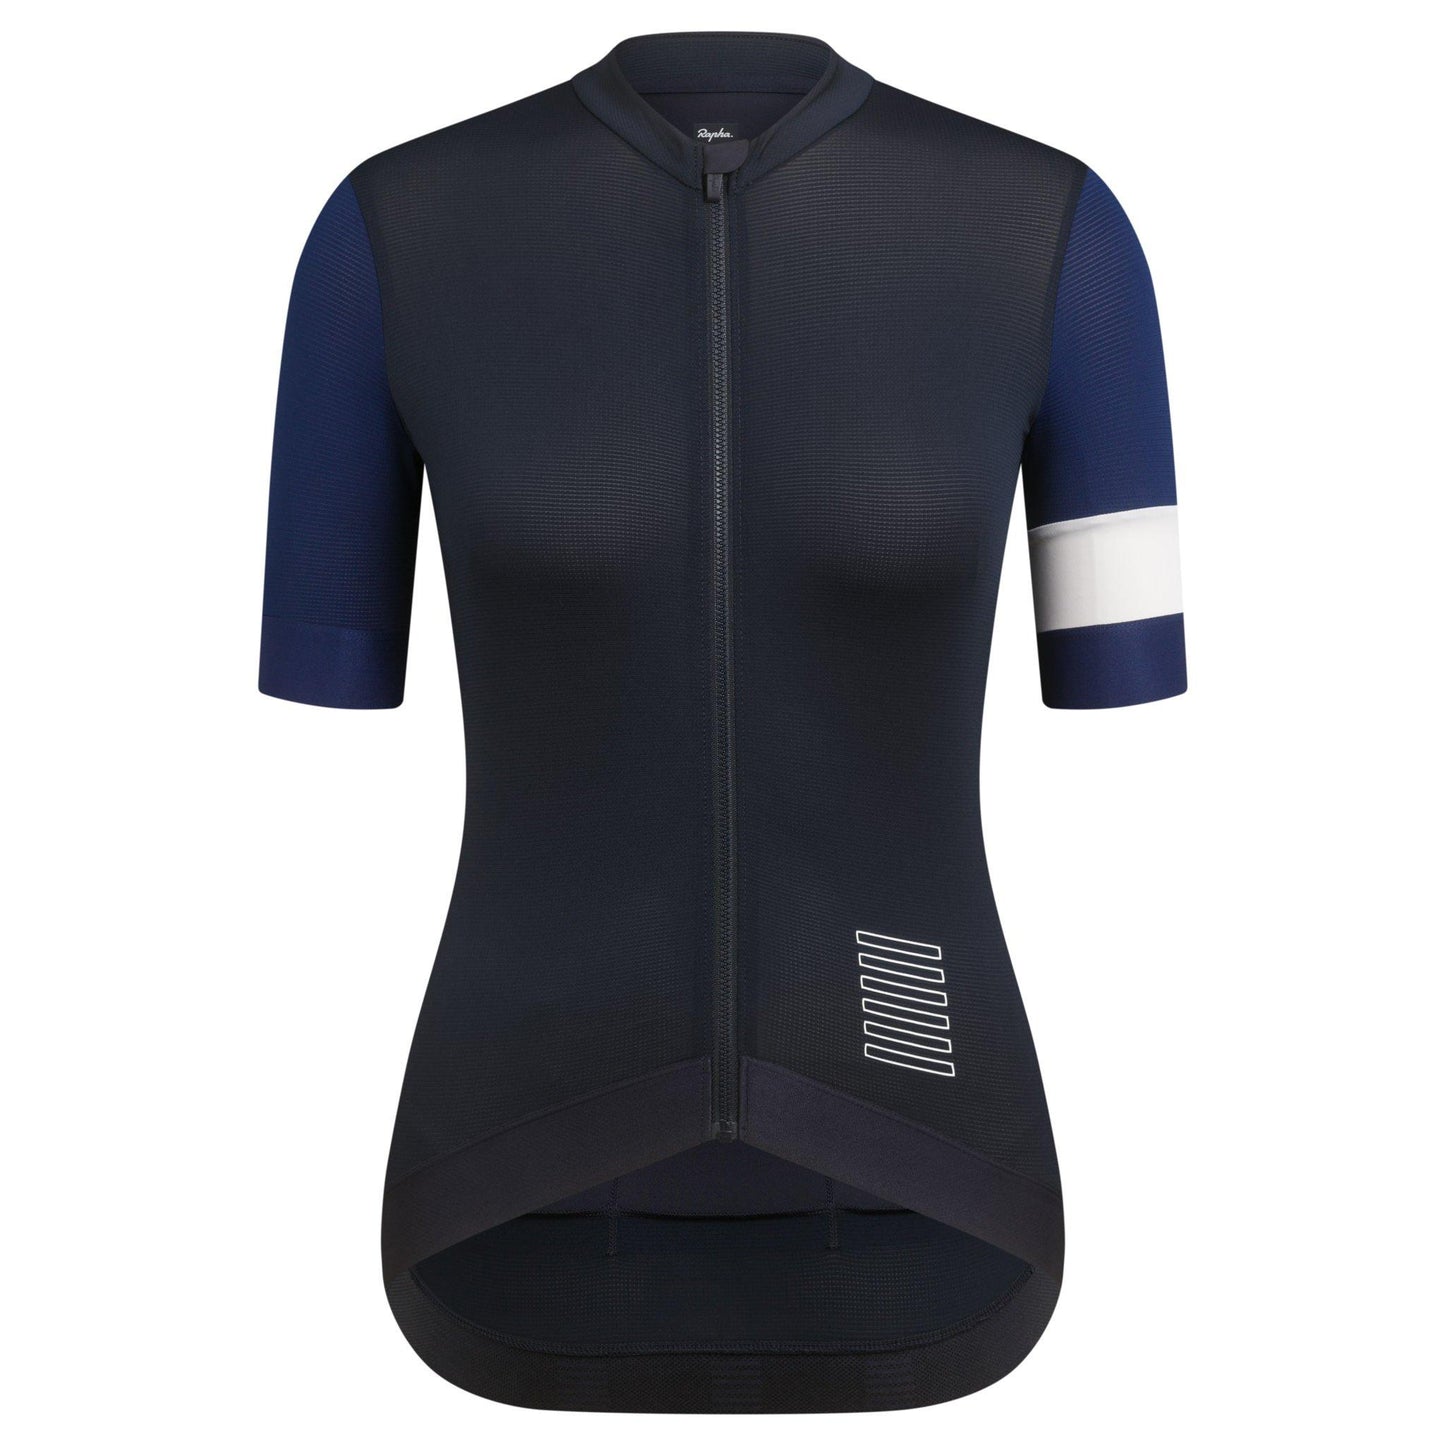 Rapha Women's Pro Team Training Jersey - Dark Navy/Navy buy online at Woolys Wheels Sydney with free delivery!